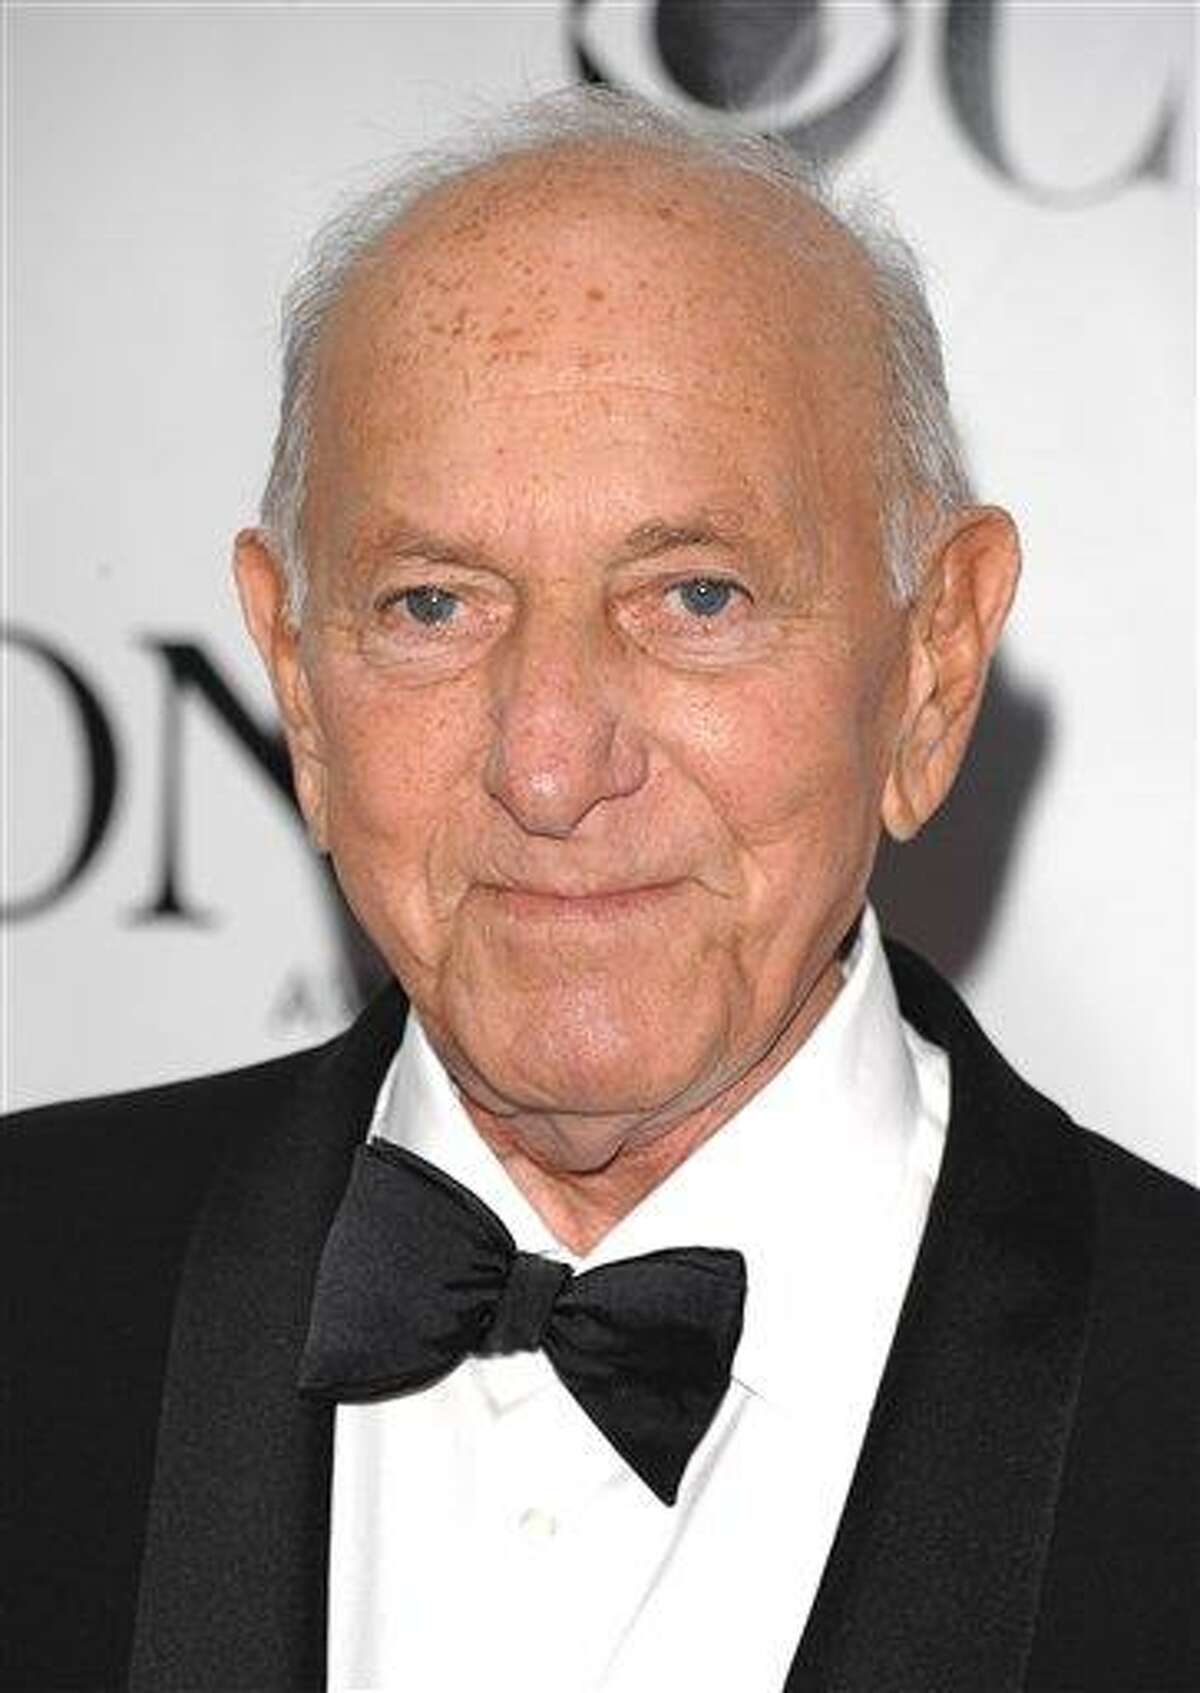 FILE - In this June 15, 2008 file photo, Jack Klugman arrives at the 62nd annual Tony Awards in New York. Klugman, who made an art of gruffness in TV's "The Odd Couple" and "Quincy, M.E.," has died at the age of 90. (AP Photo/Peter Kramer, File)